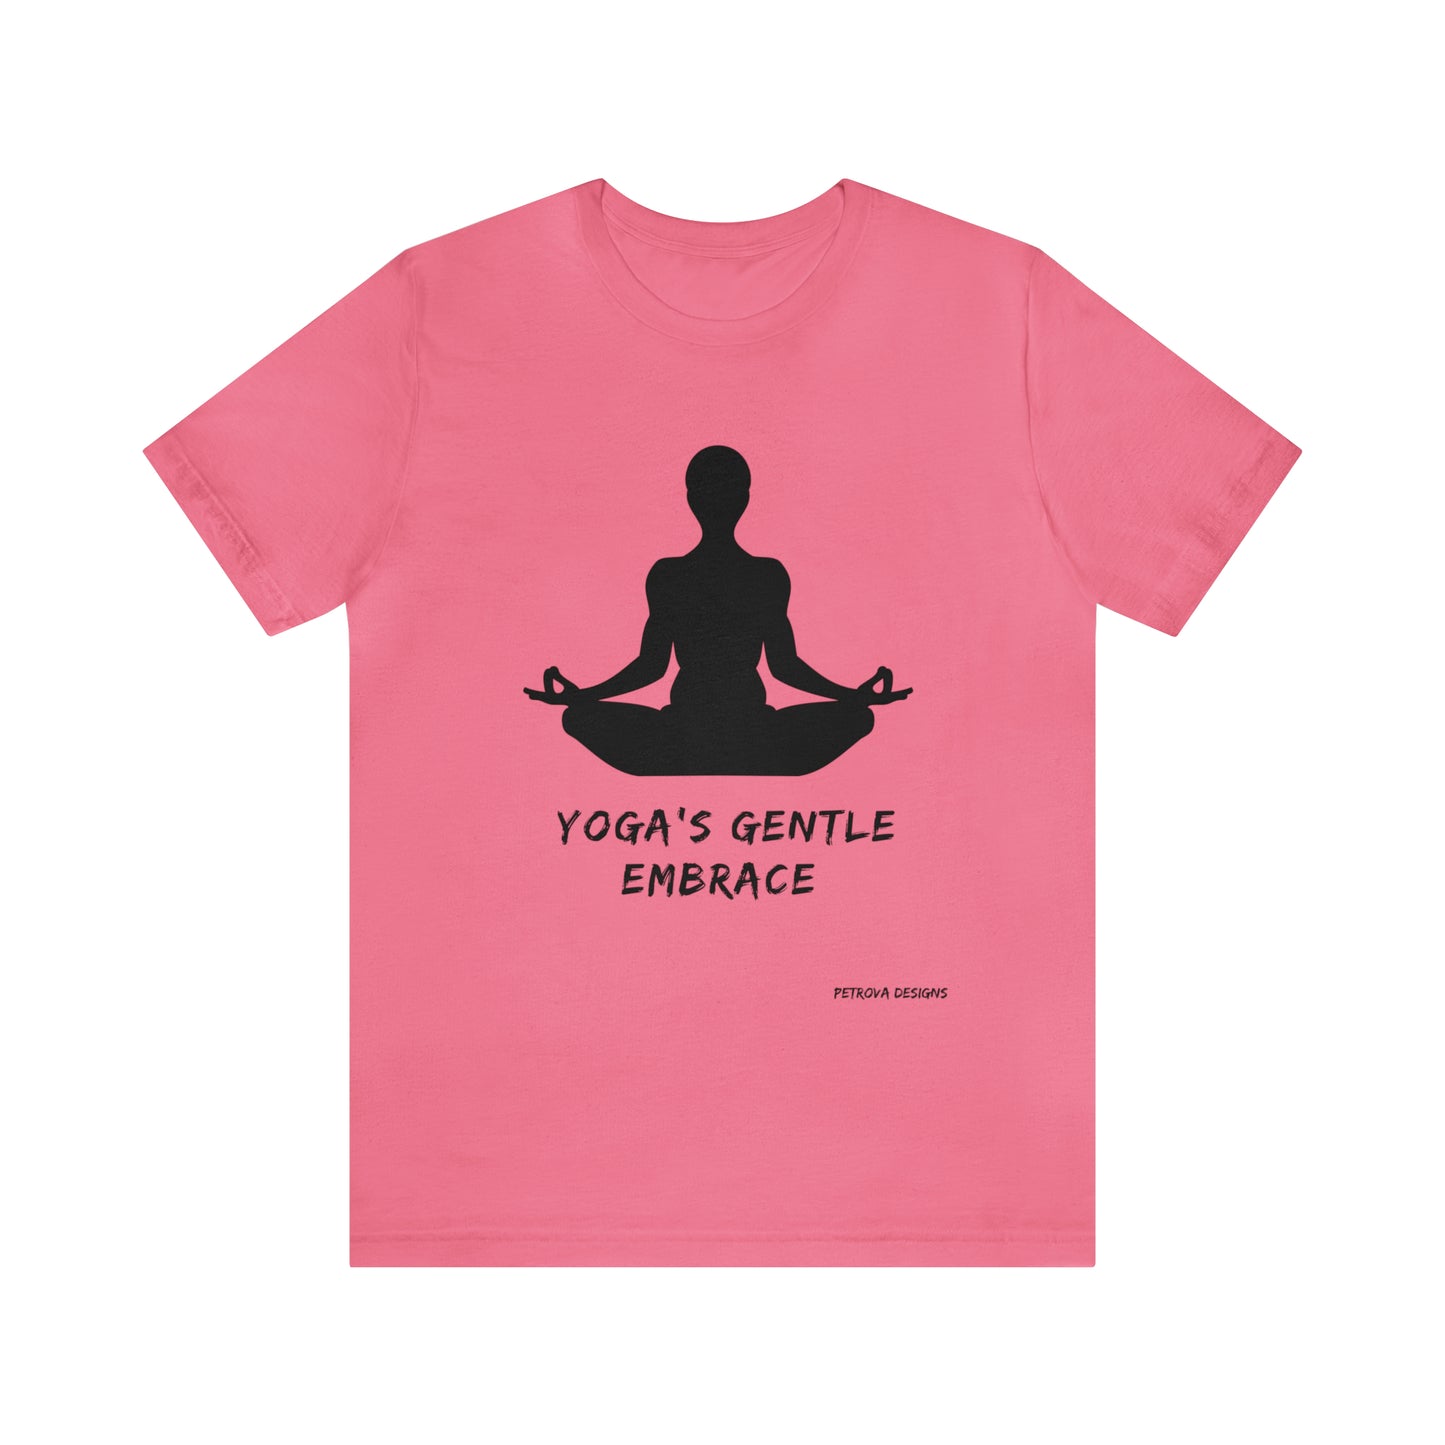 Charity Pink 2XL T-Shirt Tshirt Design Gift for Friend and Family Short Sleeved Shirt Yoga Petrova Designs